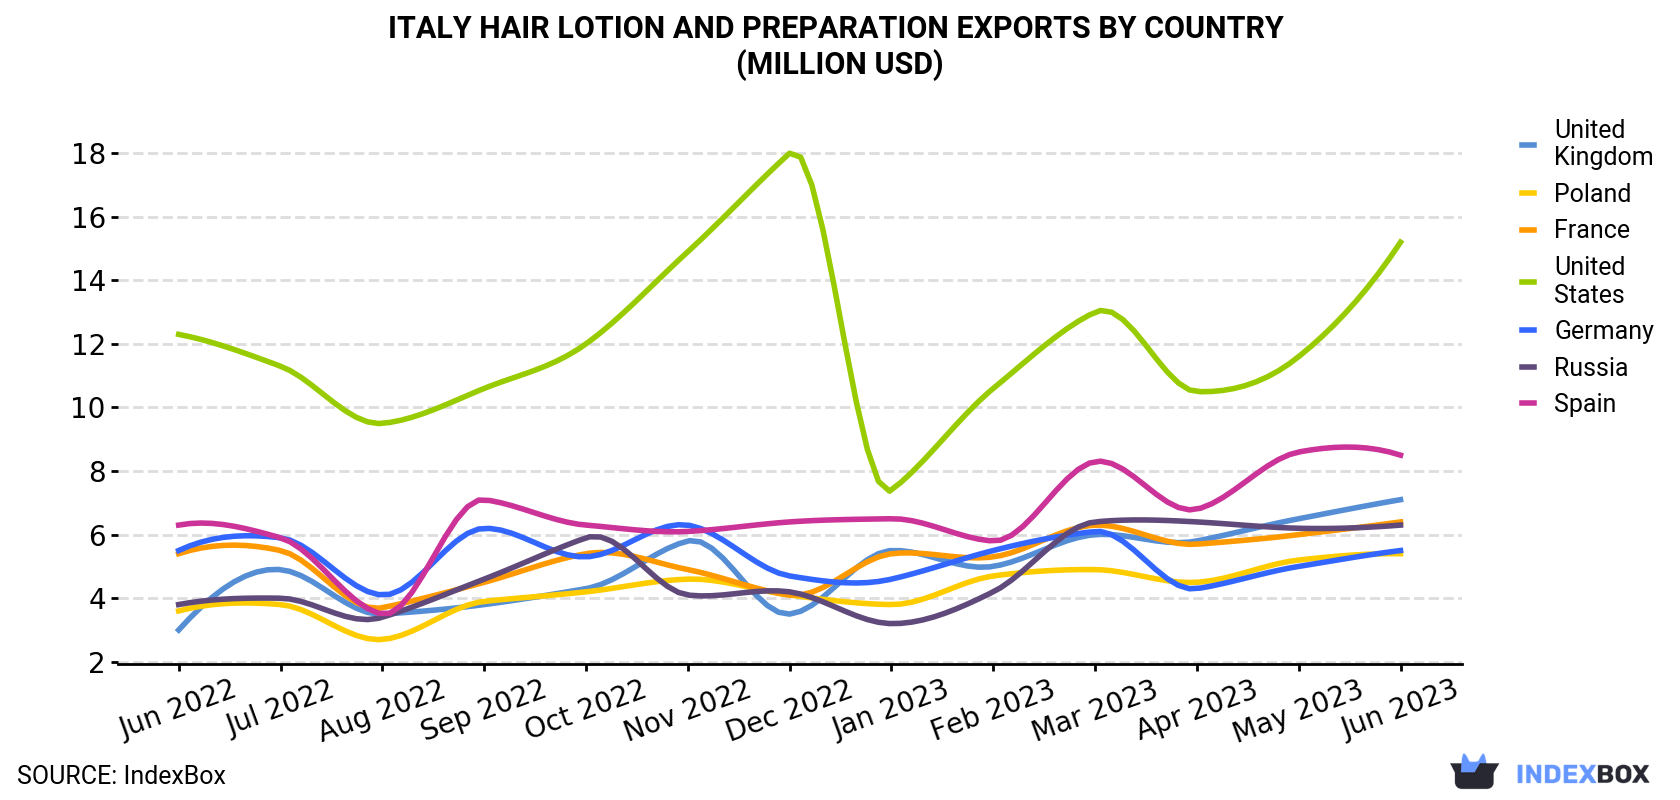 Italy Hair Lotion and Preparation Exports By Country (Million USD)